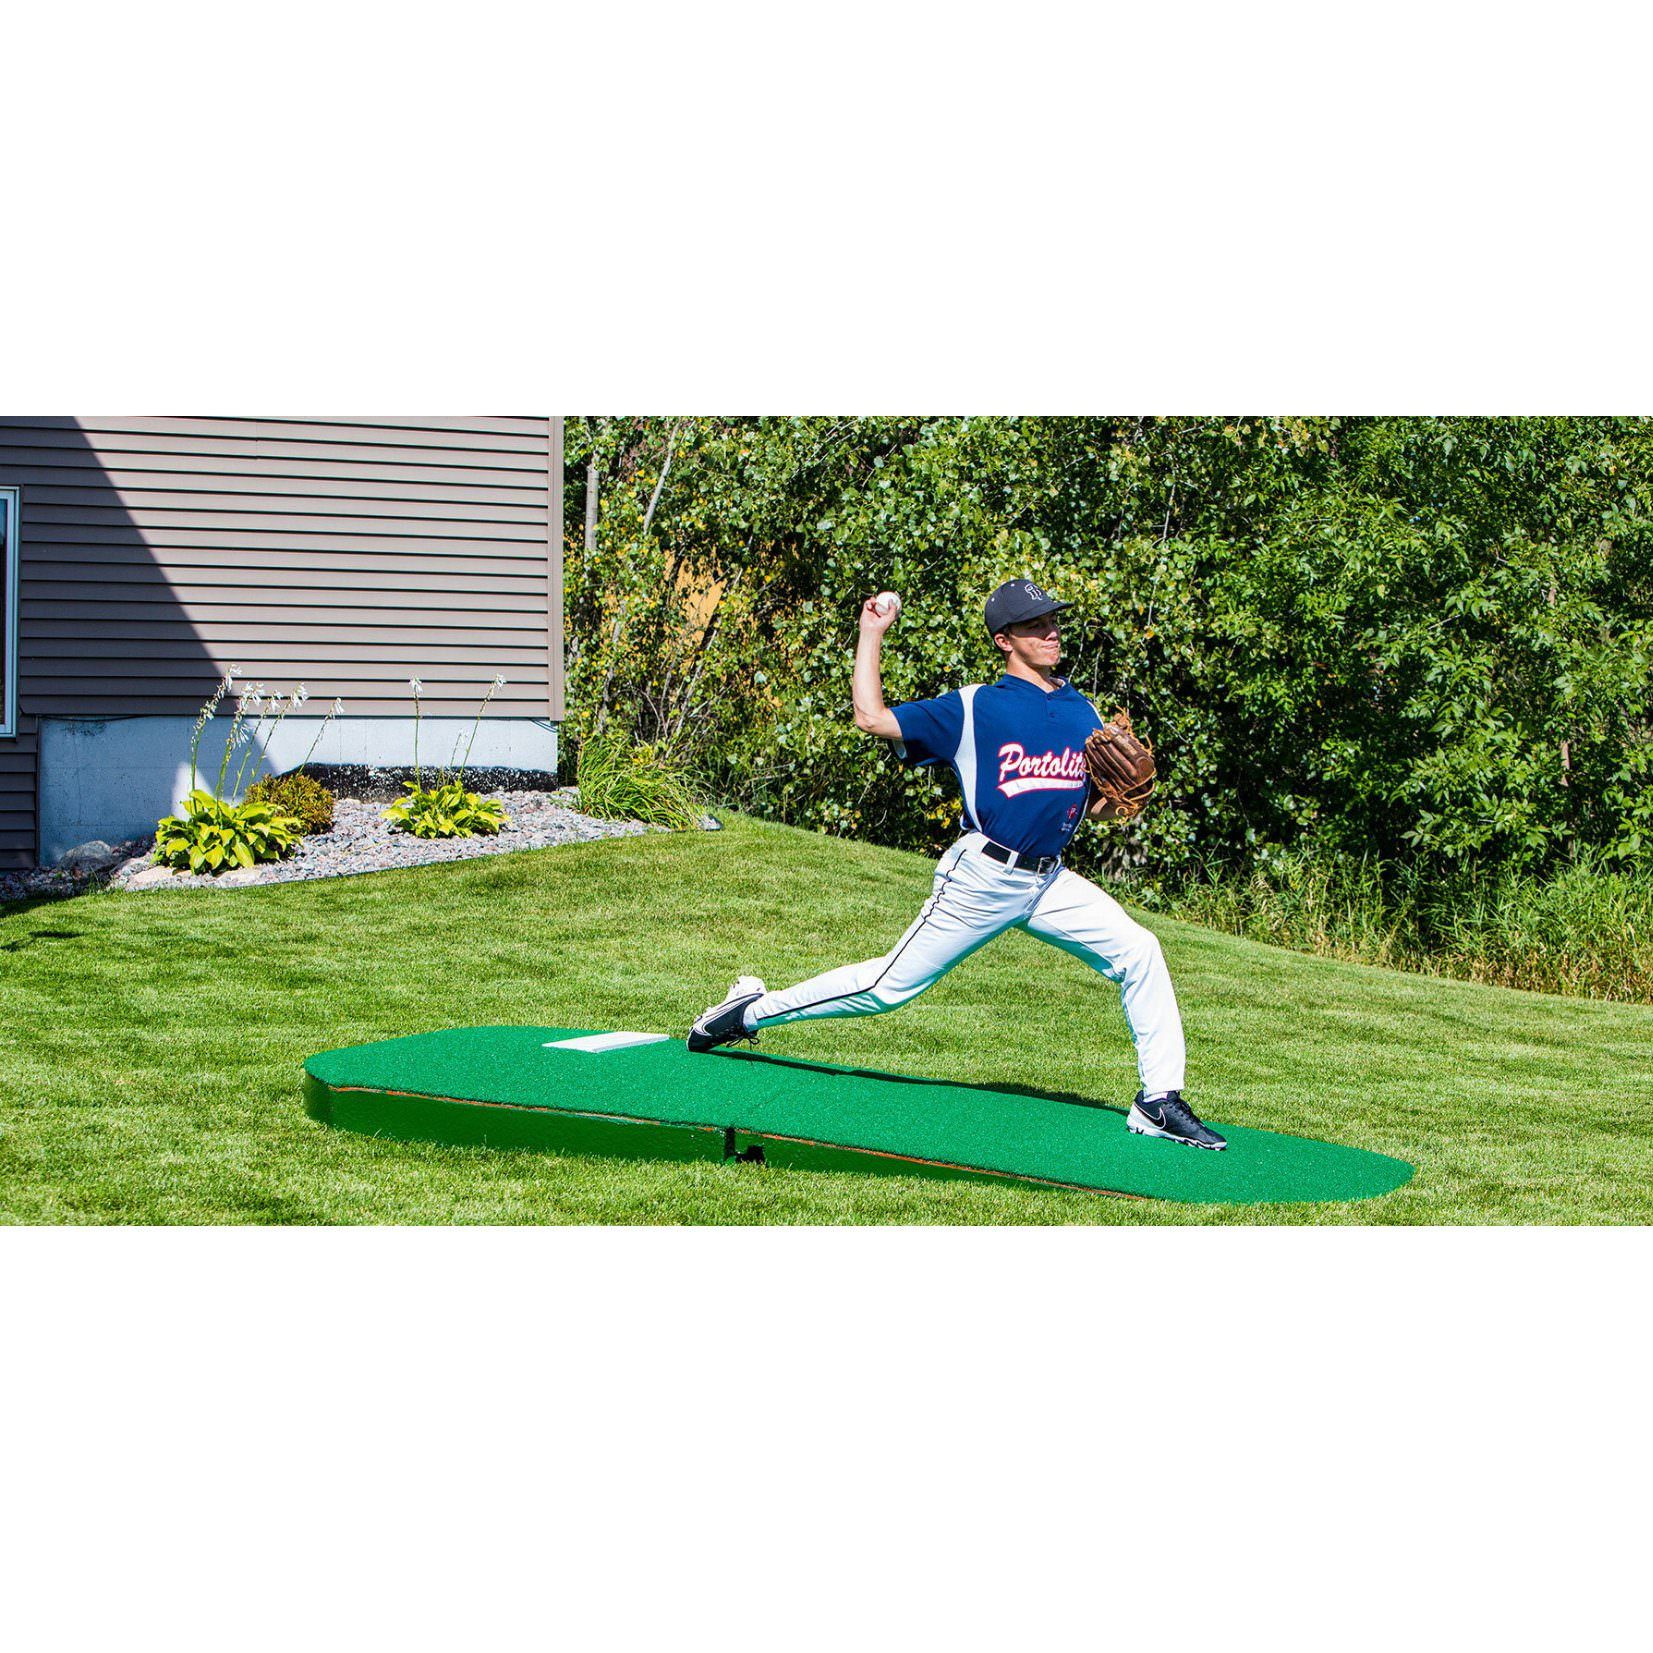 Portolite 10" Two-Piece Portable Pitching Mound green side view pitcher stride